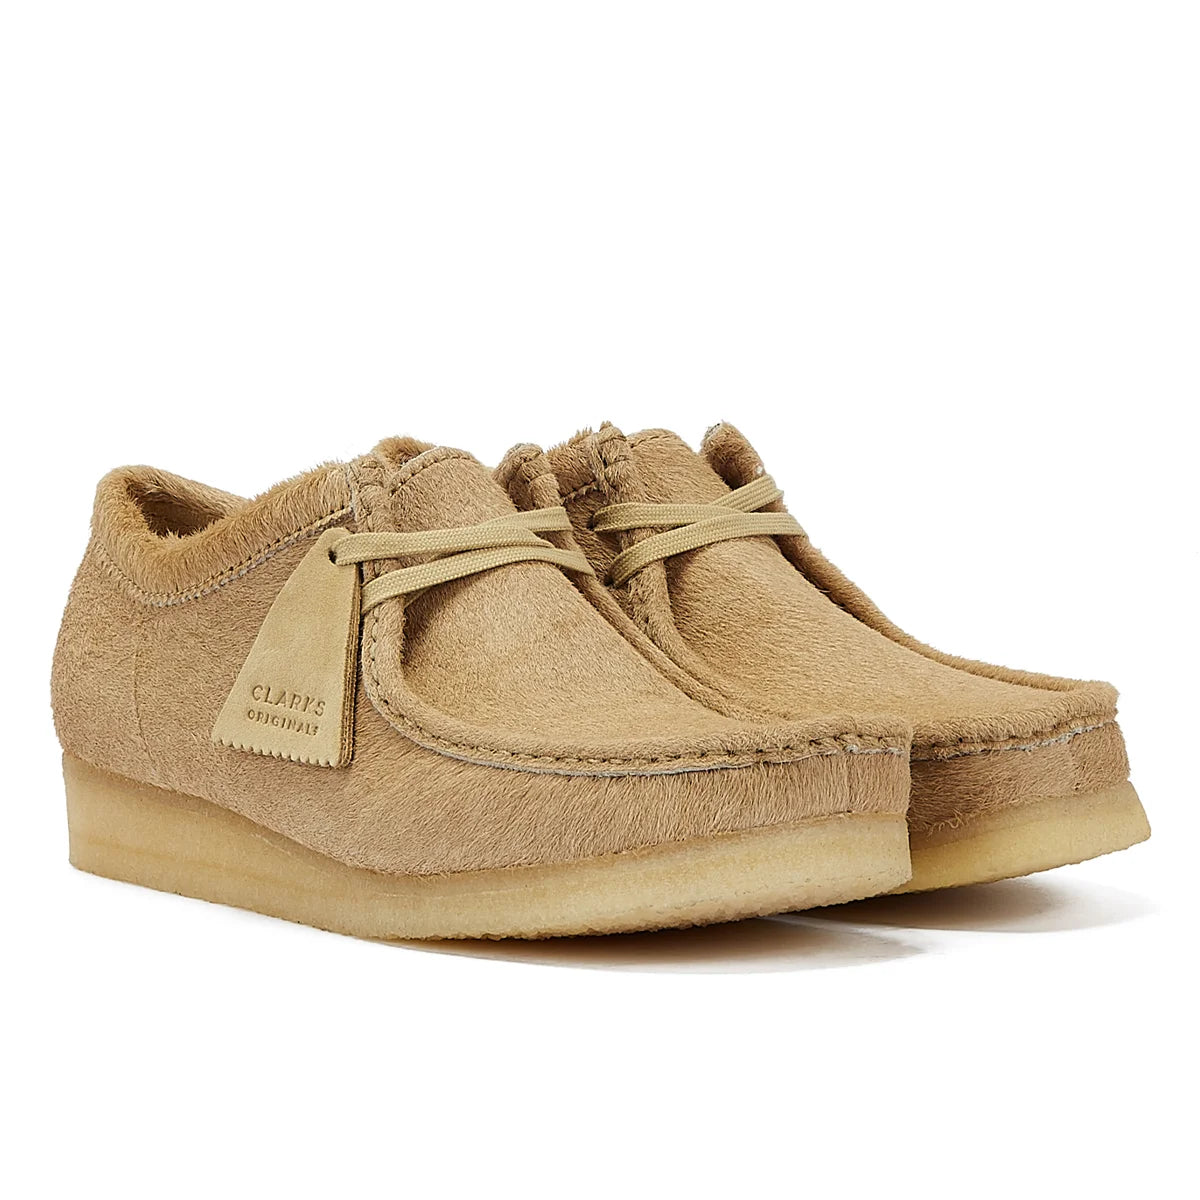 Clarks Originals Wallabee Hair on Men’s Maple Lace-Up Shoes